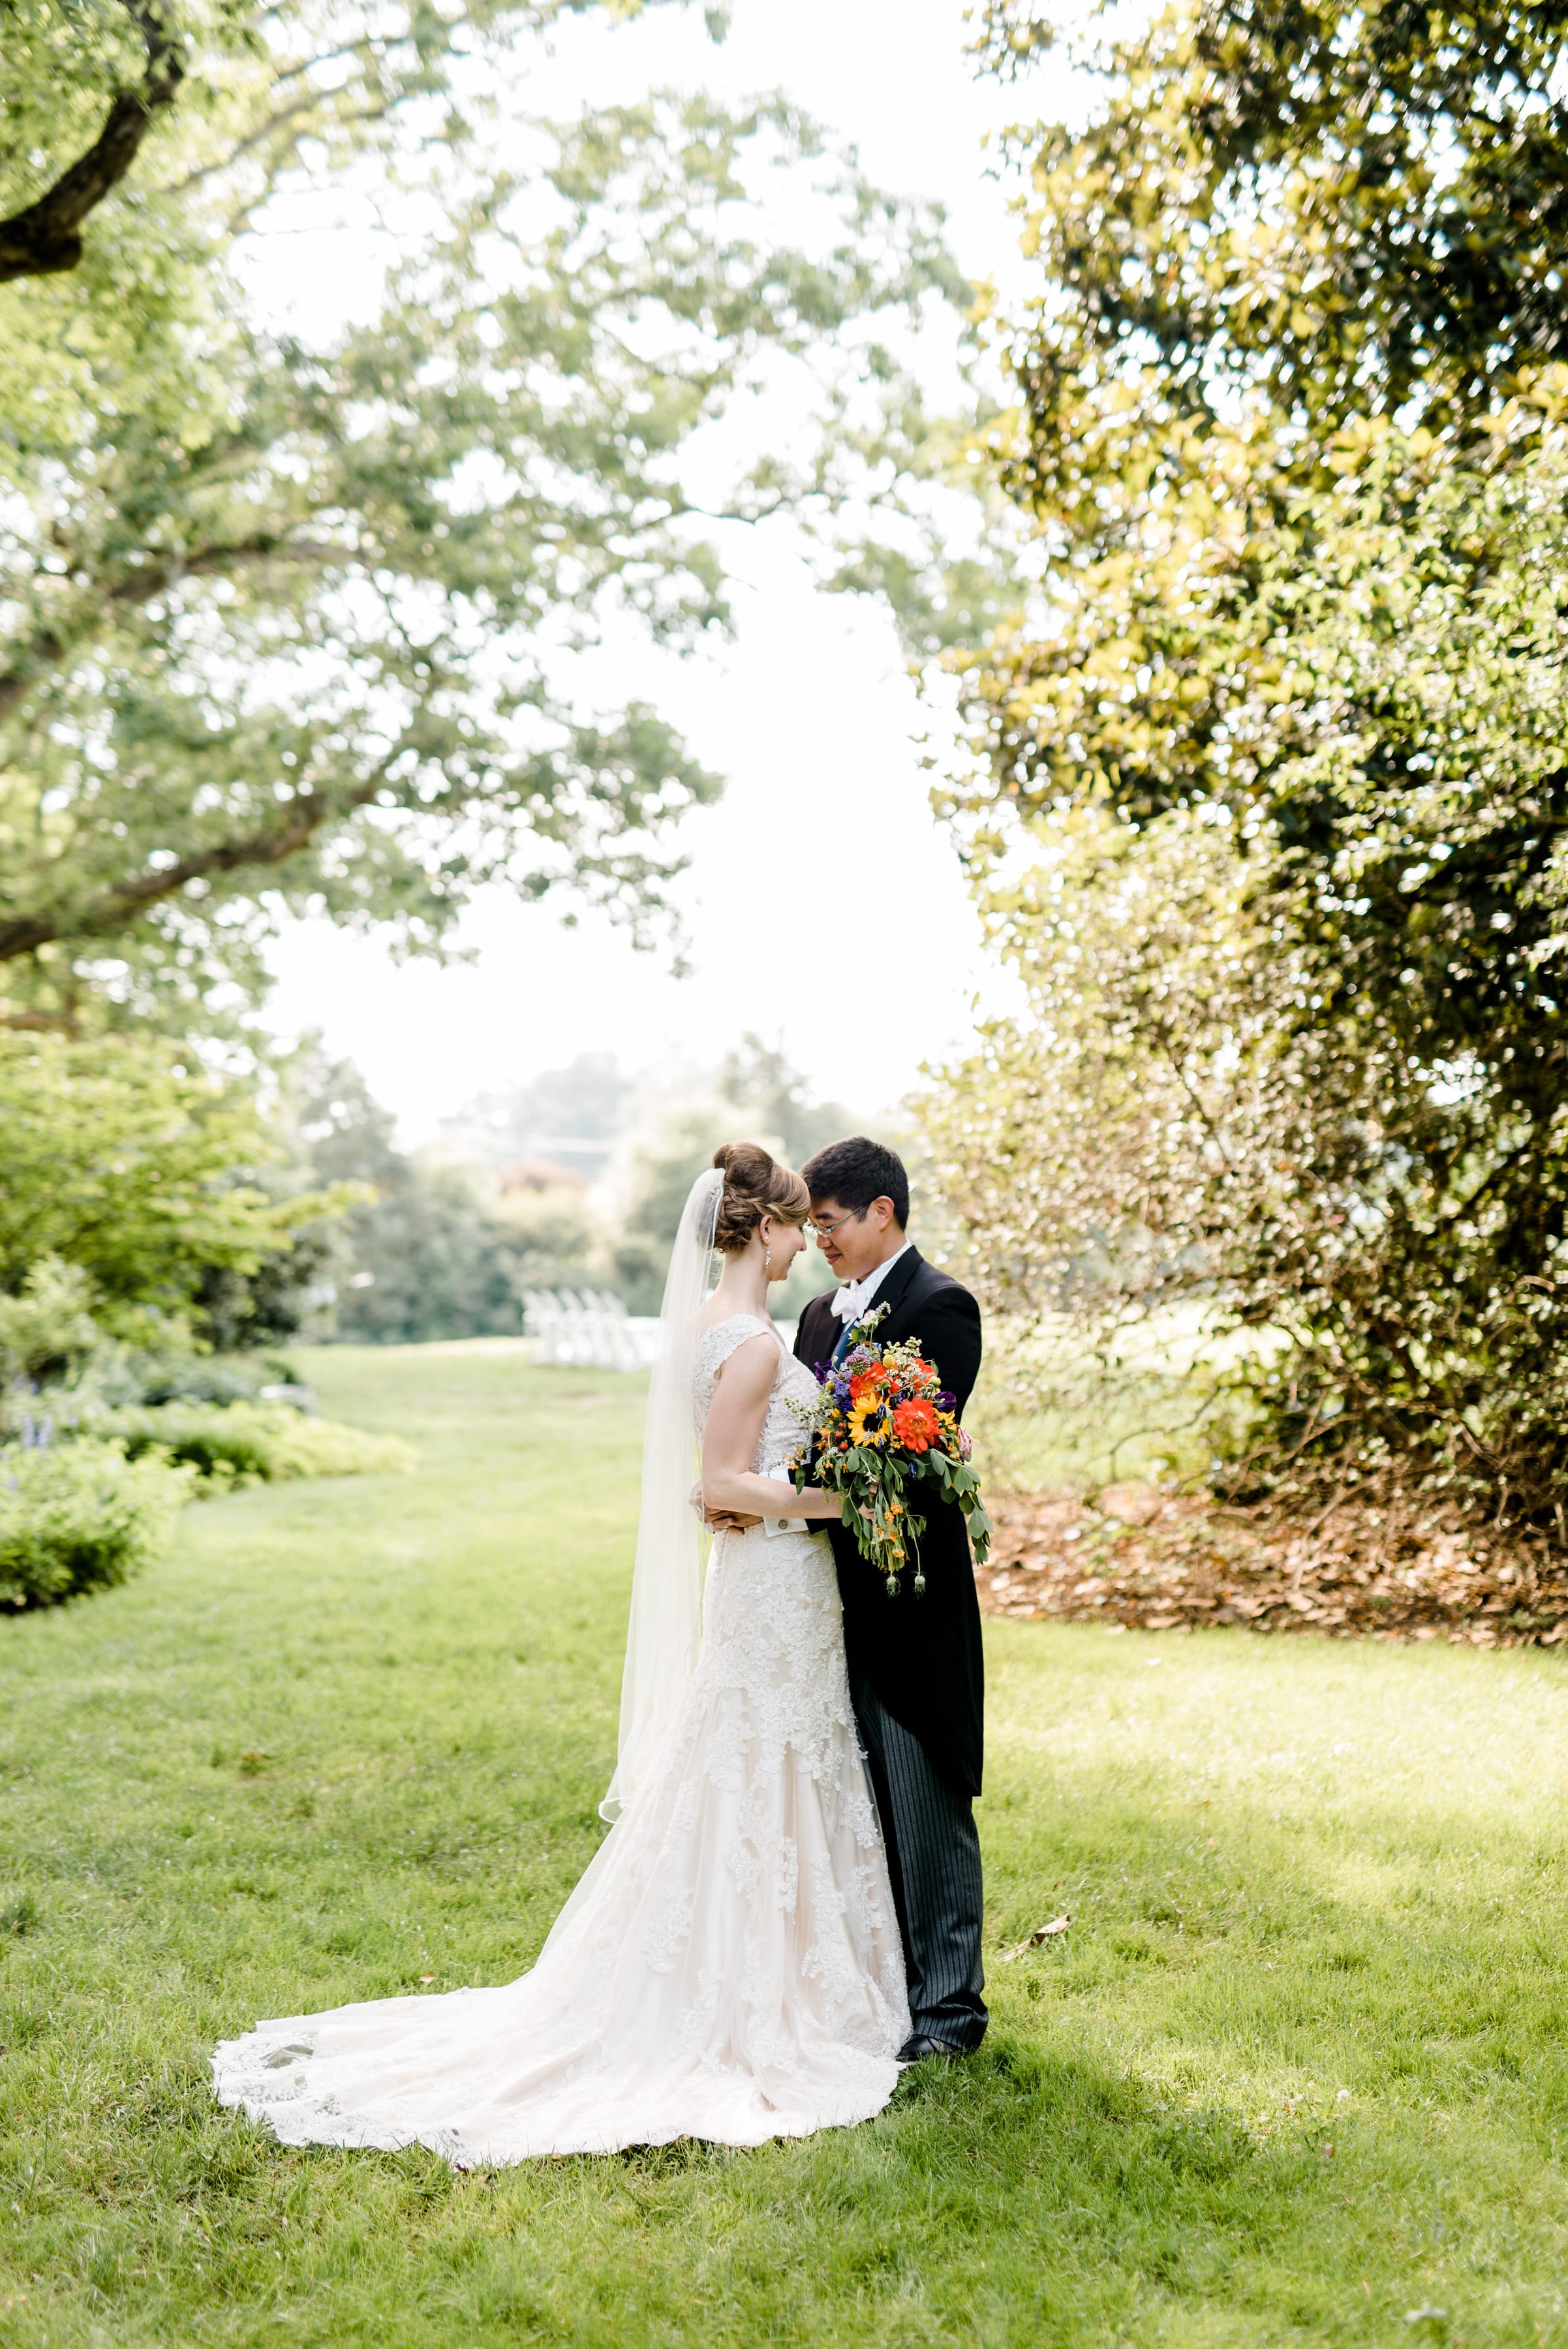 Lace Gown Melanie in Classic and Colorful Wedding - Maggie Bride wearing Melanie by Maggie Sottero